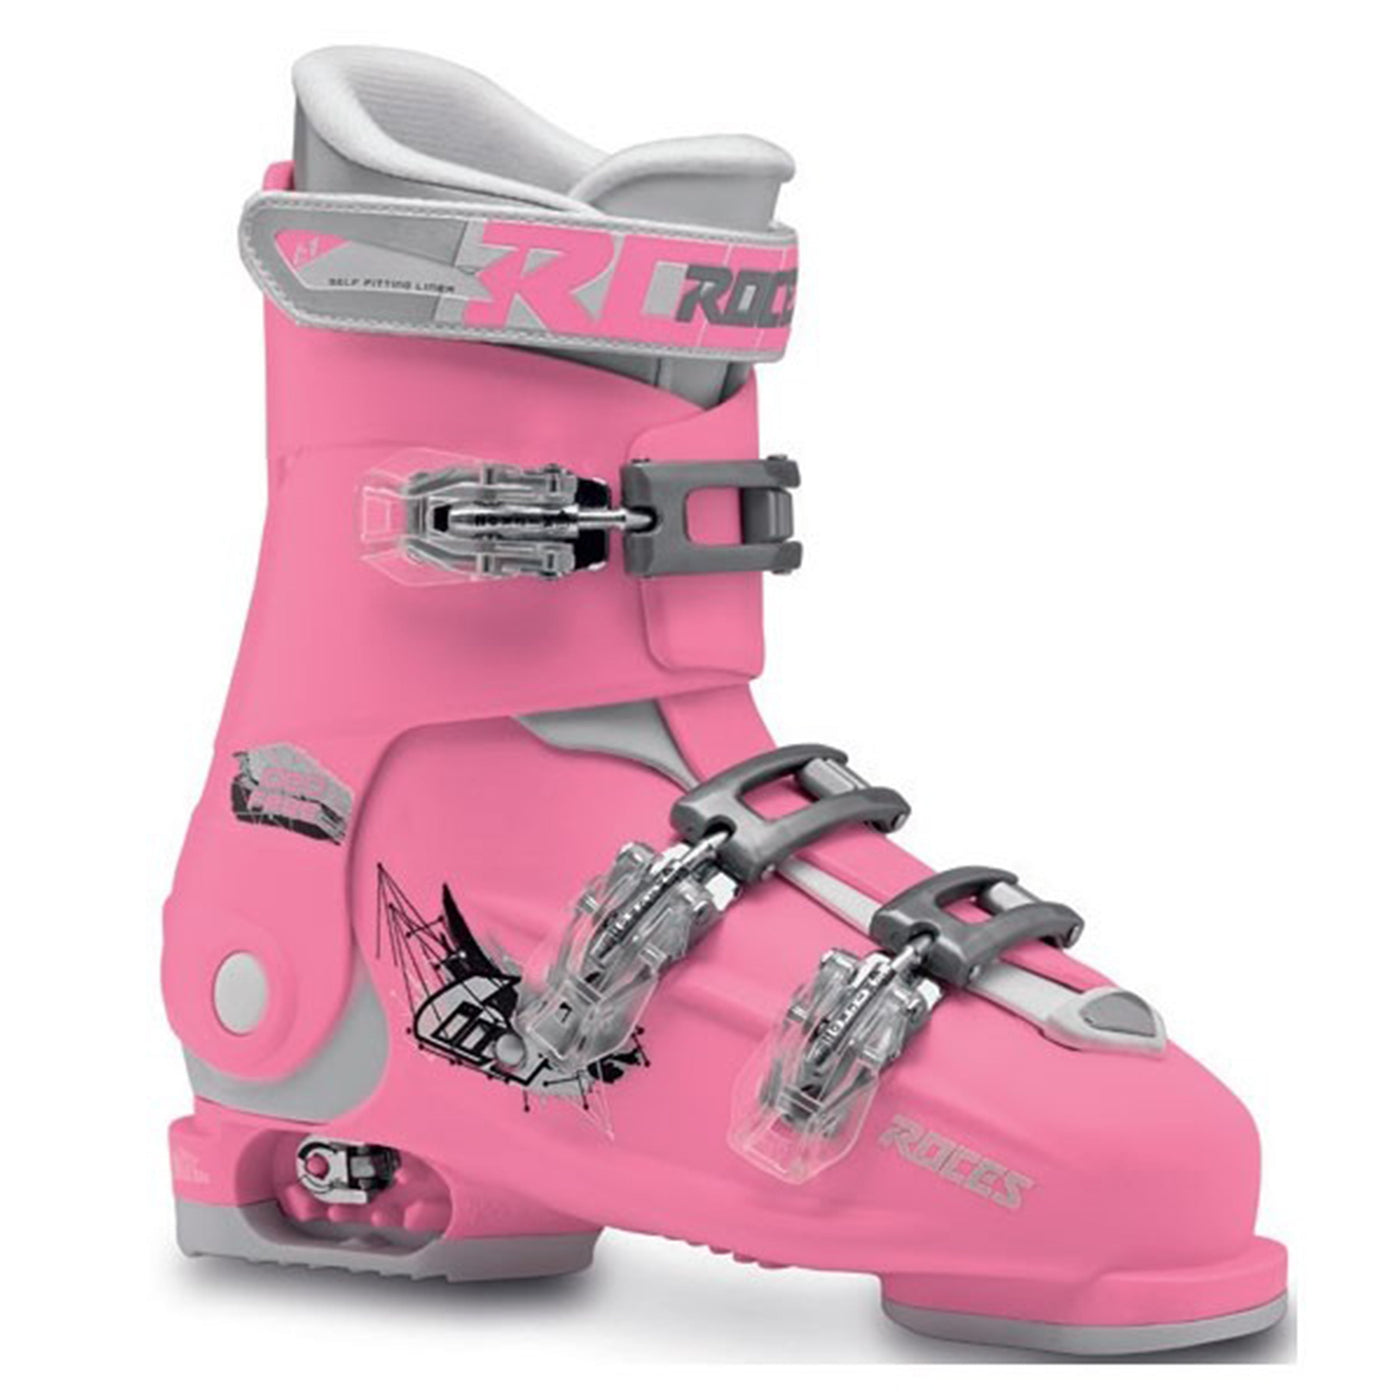 Roces IDEA Free Adjustable Youth Ski Boots | Size 22.5 - 25.5 MP - (Open Box Return) SKI BOOTS Roces   